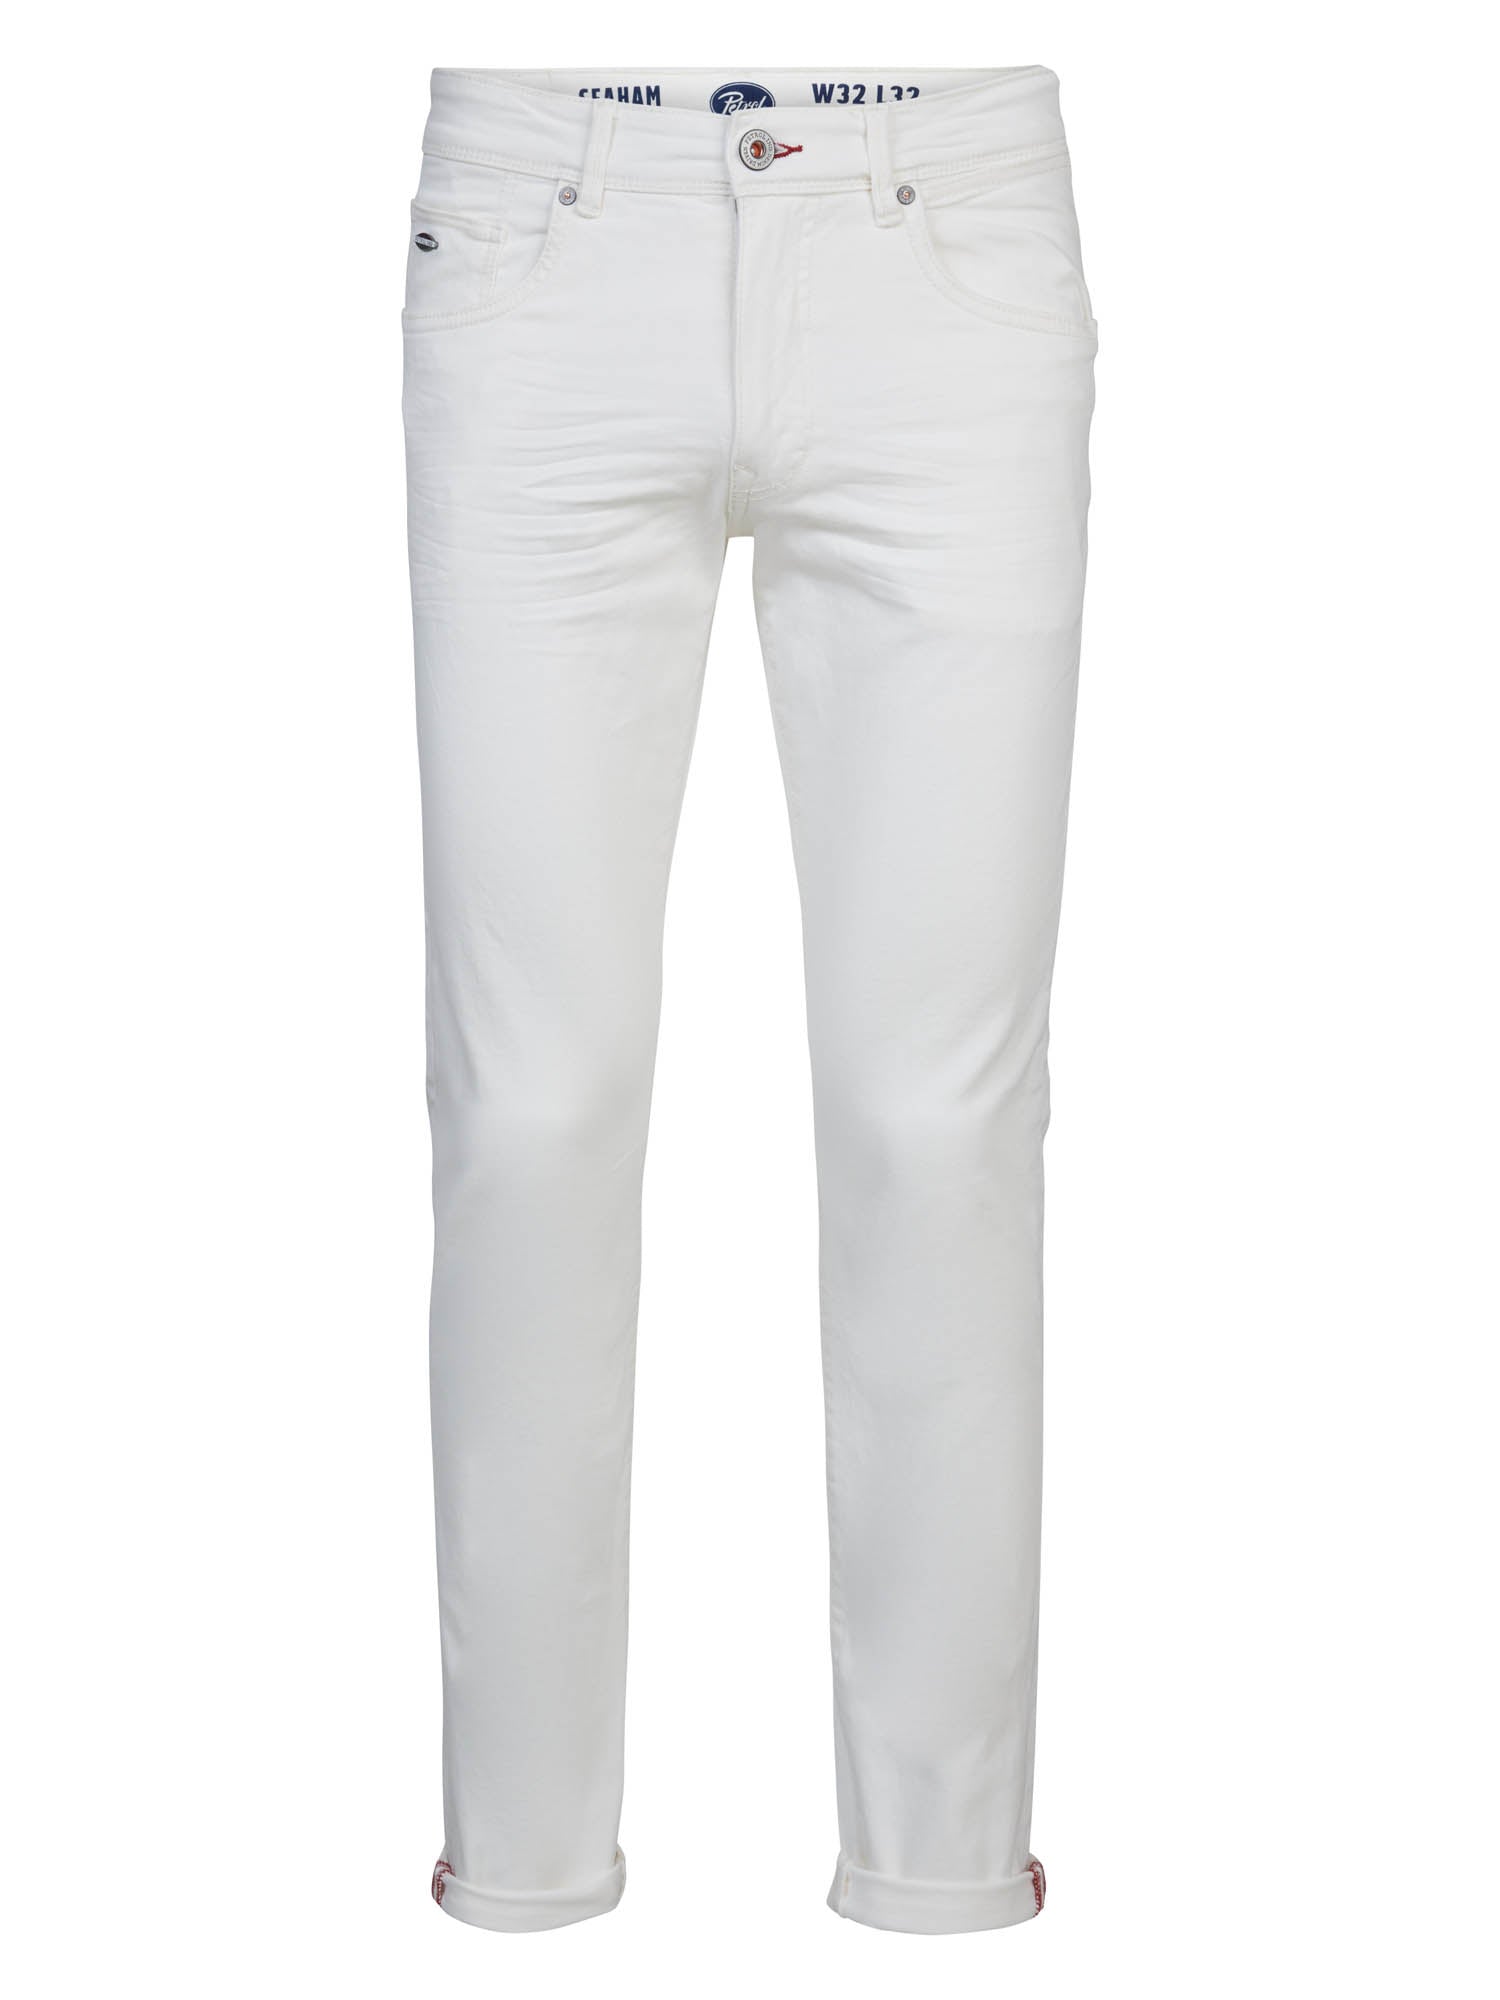 Petrol Industries Seaham Coloured, Slim-fit Jeans Bright White - 32